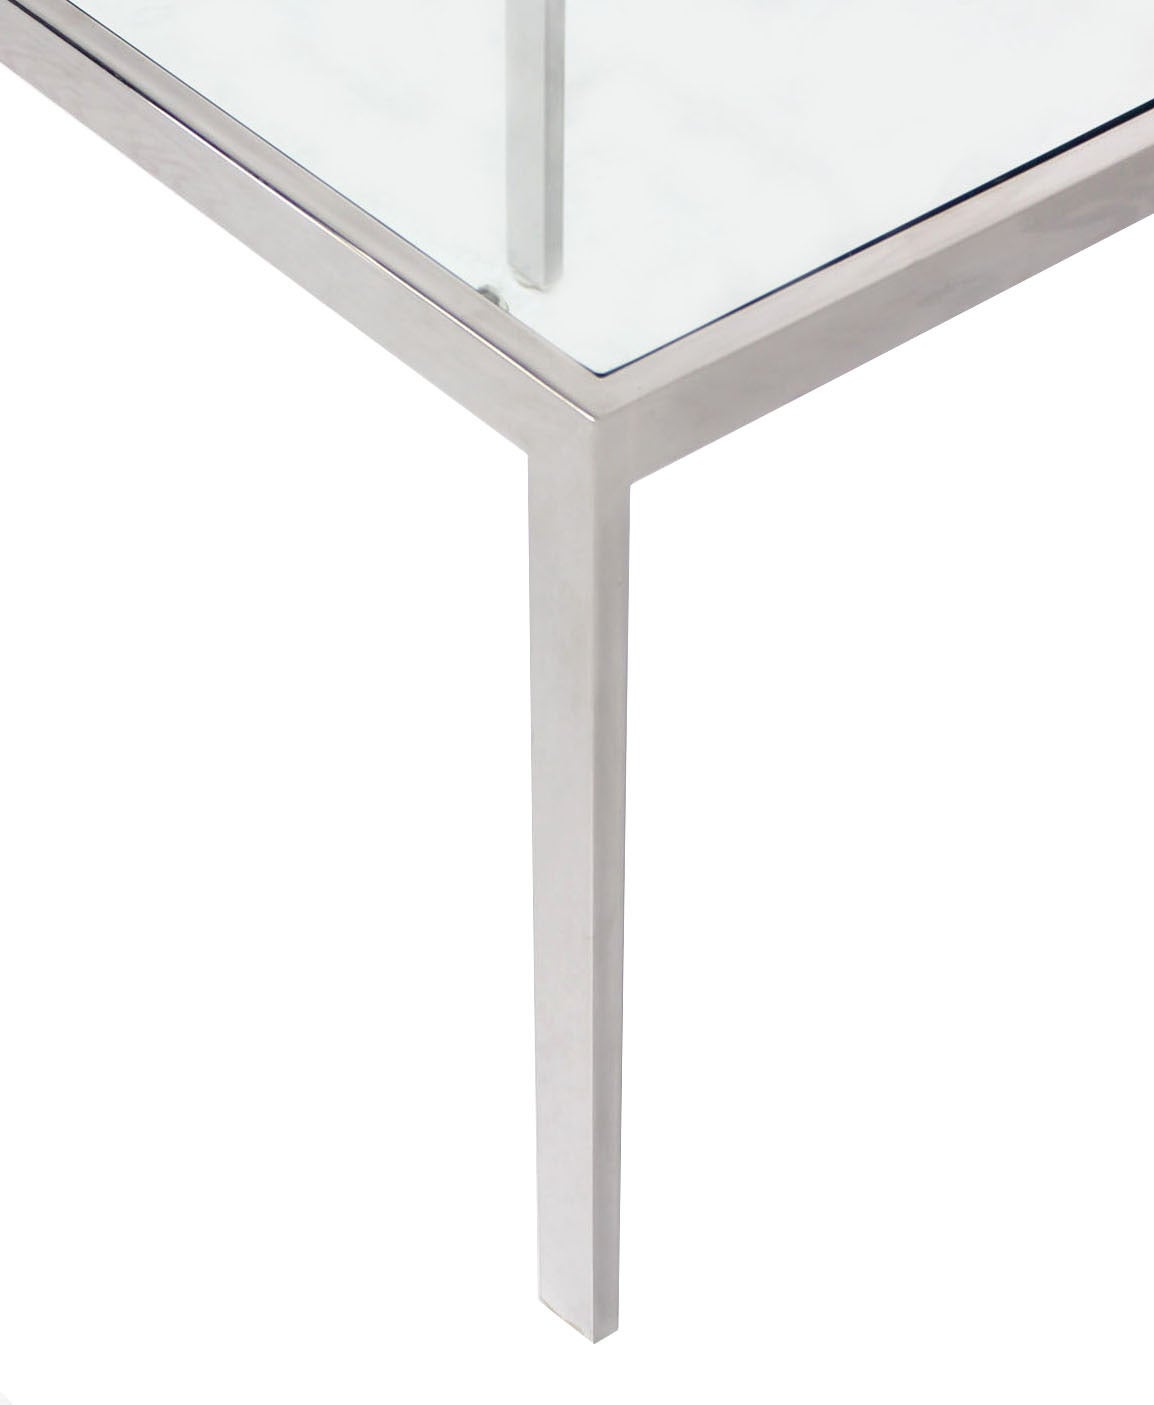 American Chrome and Glass Mid-Century Modern Side Table